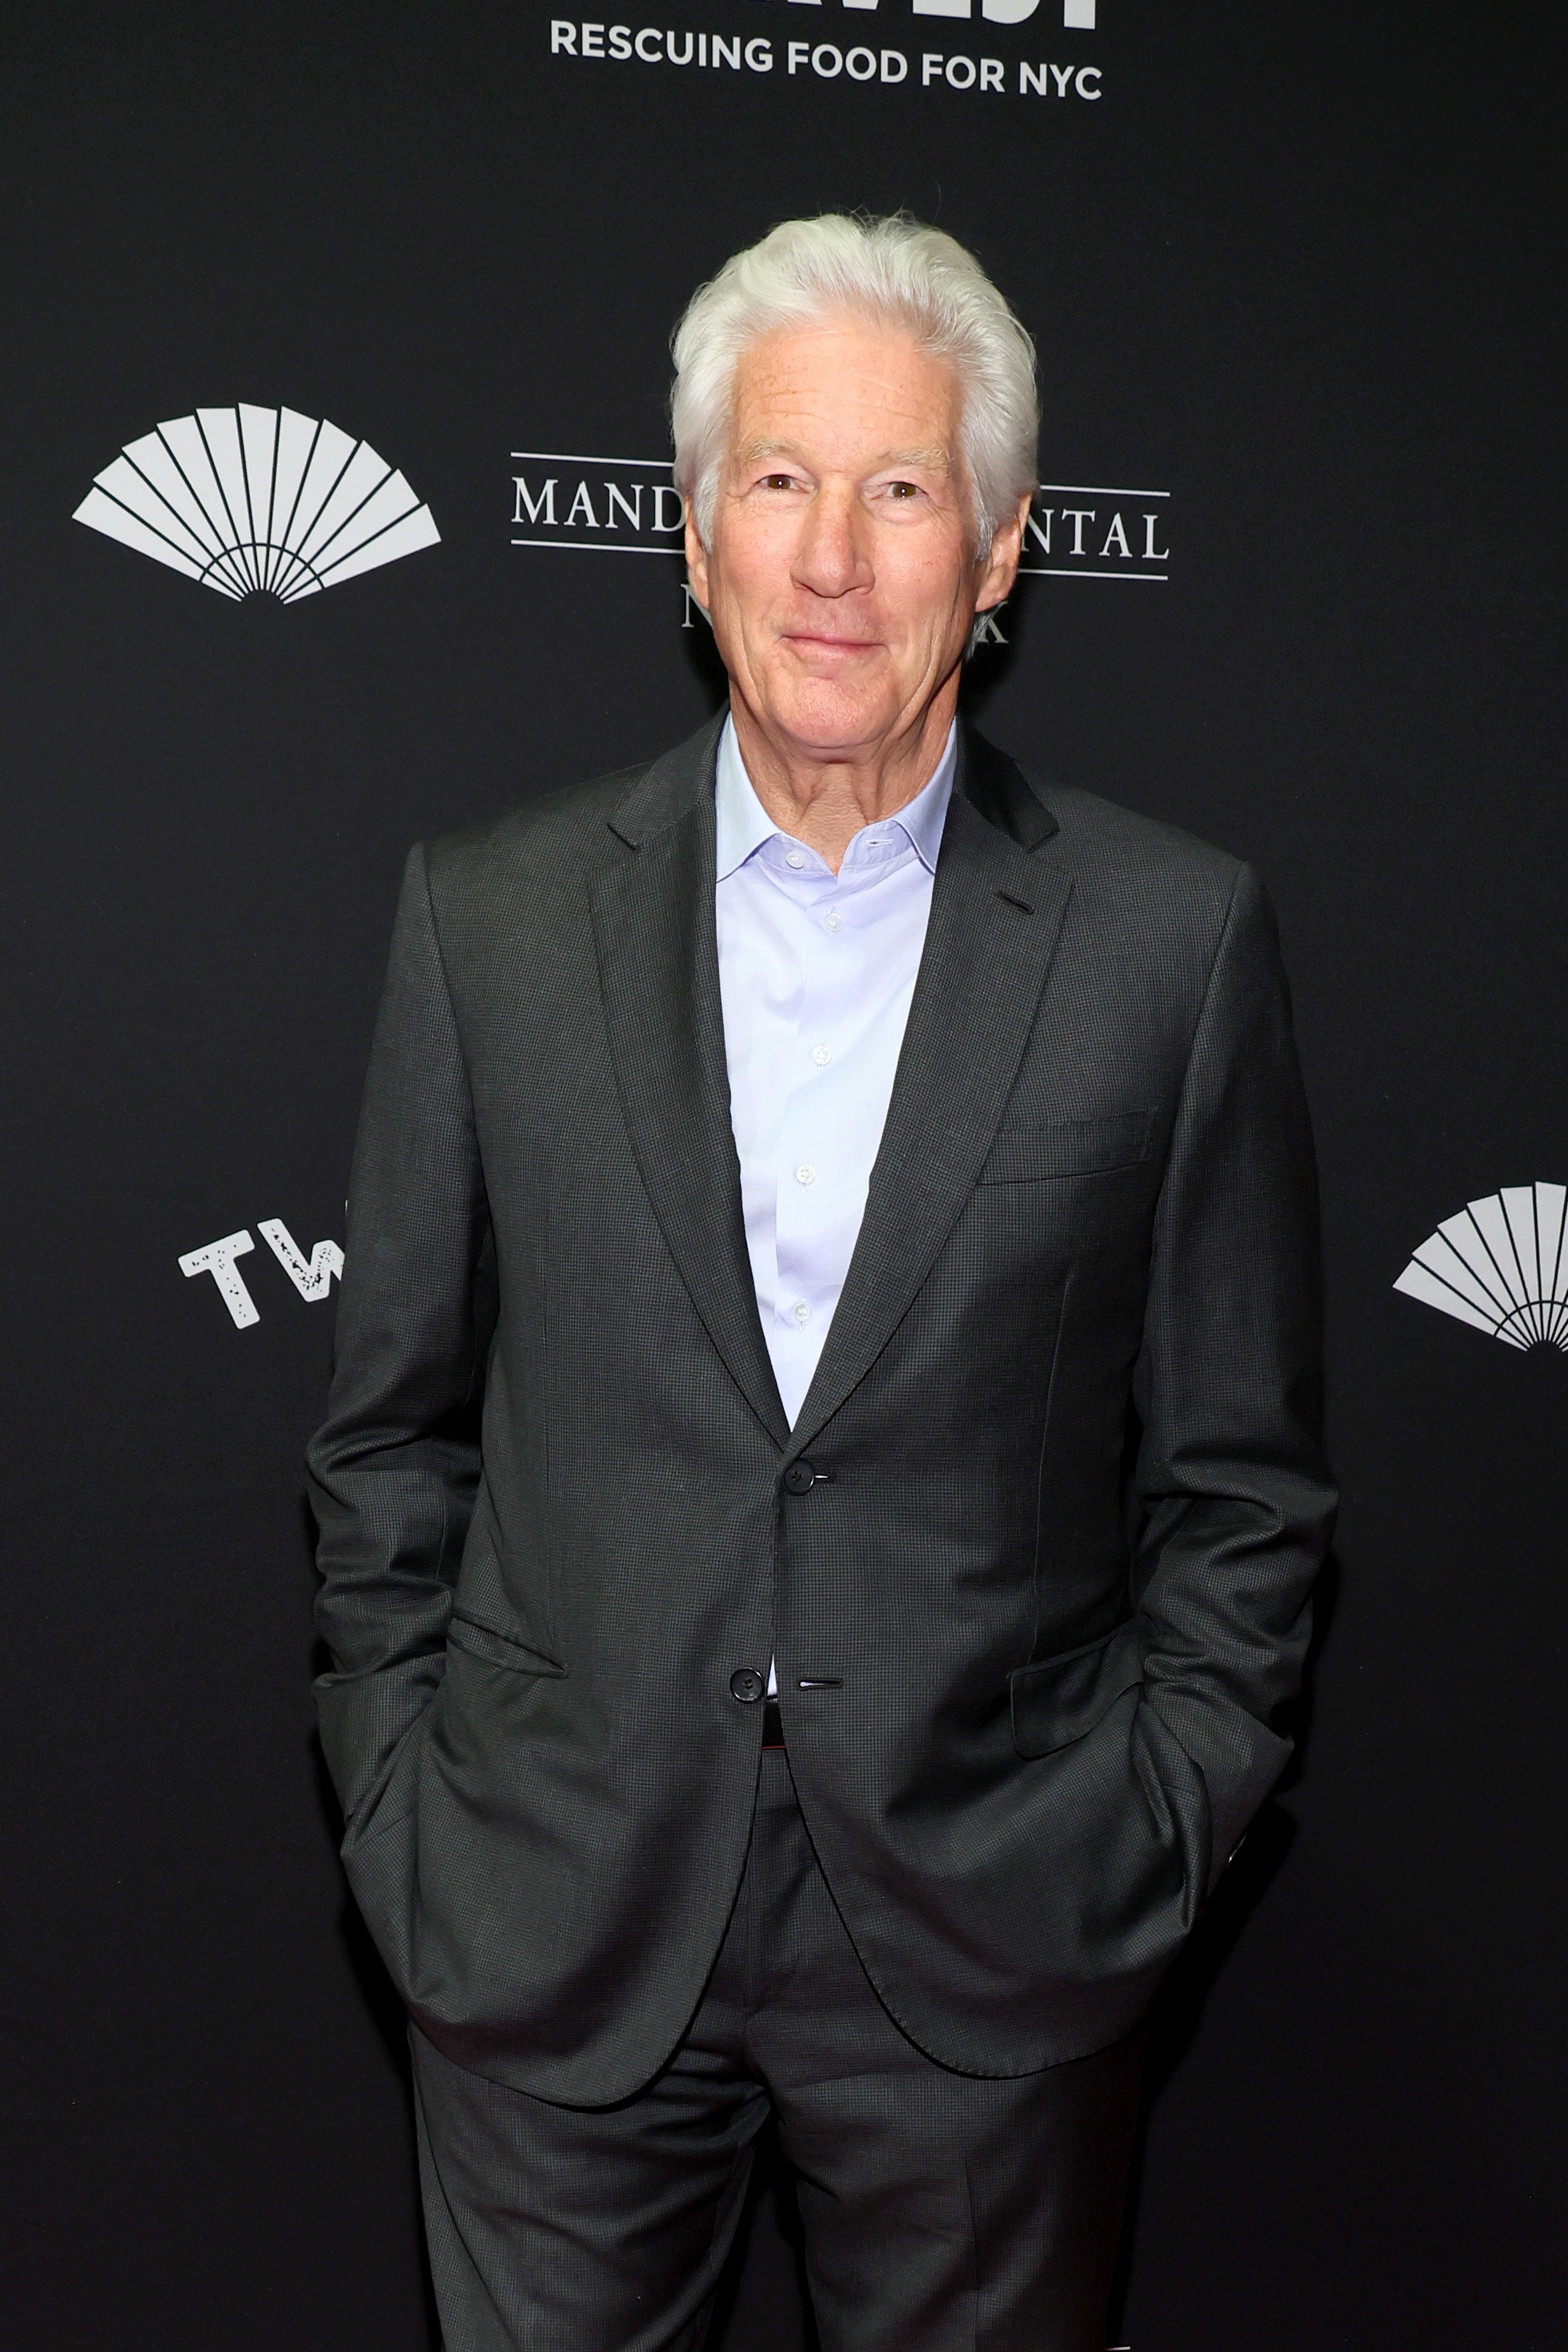 Richard Gere Shares Rare Remark About Life as a Dad 1